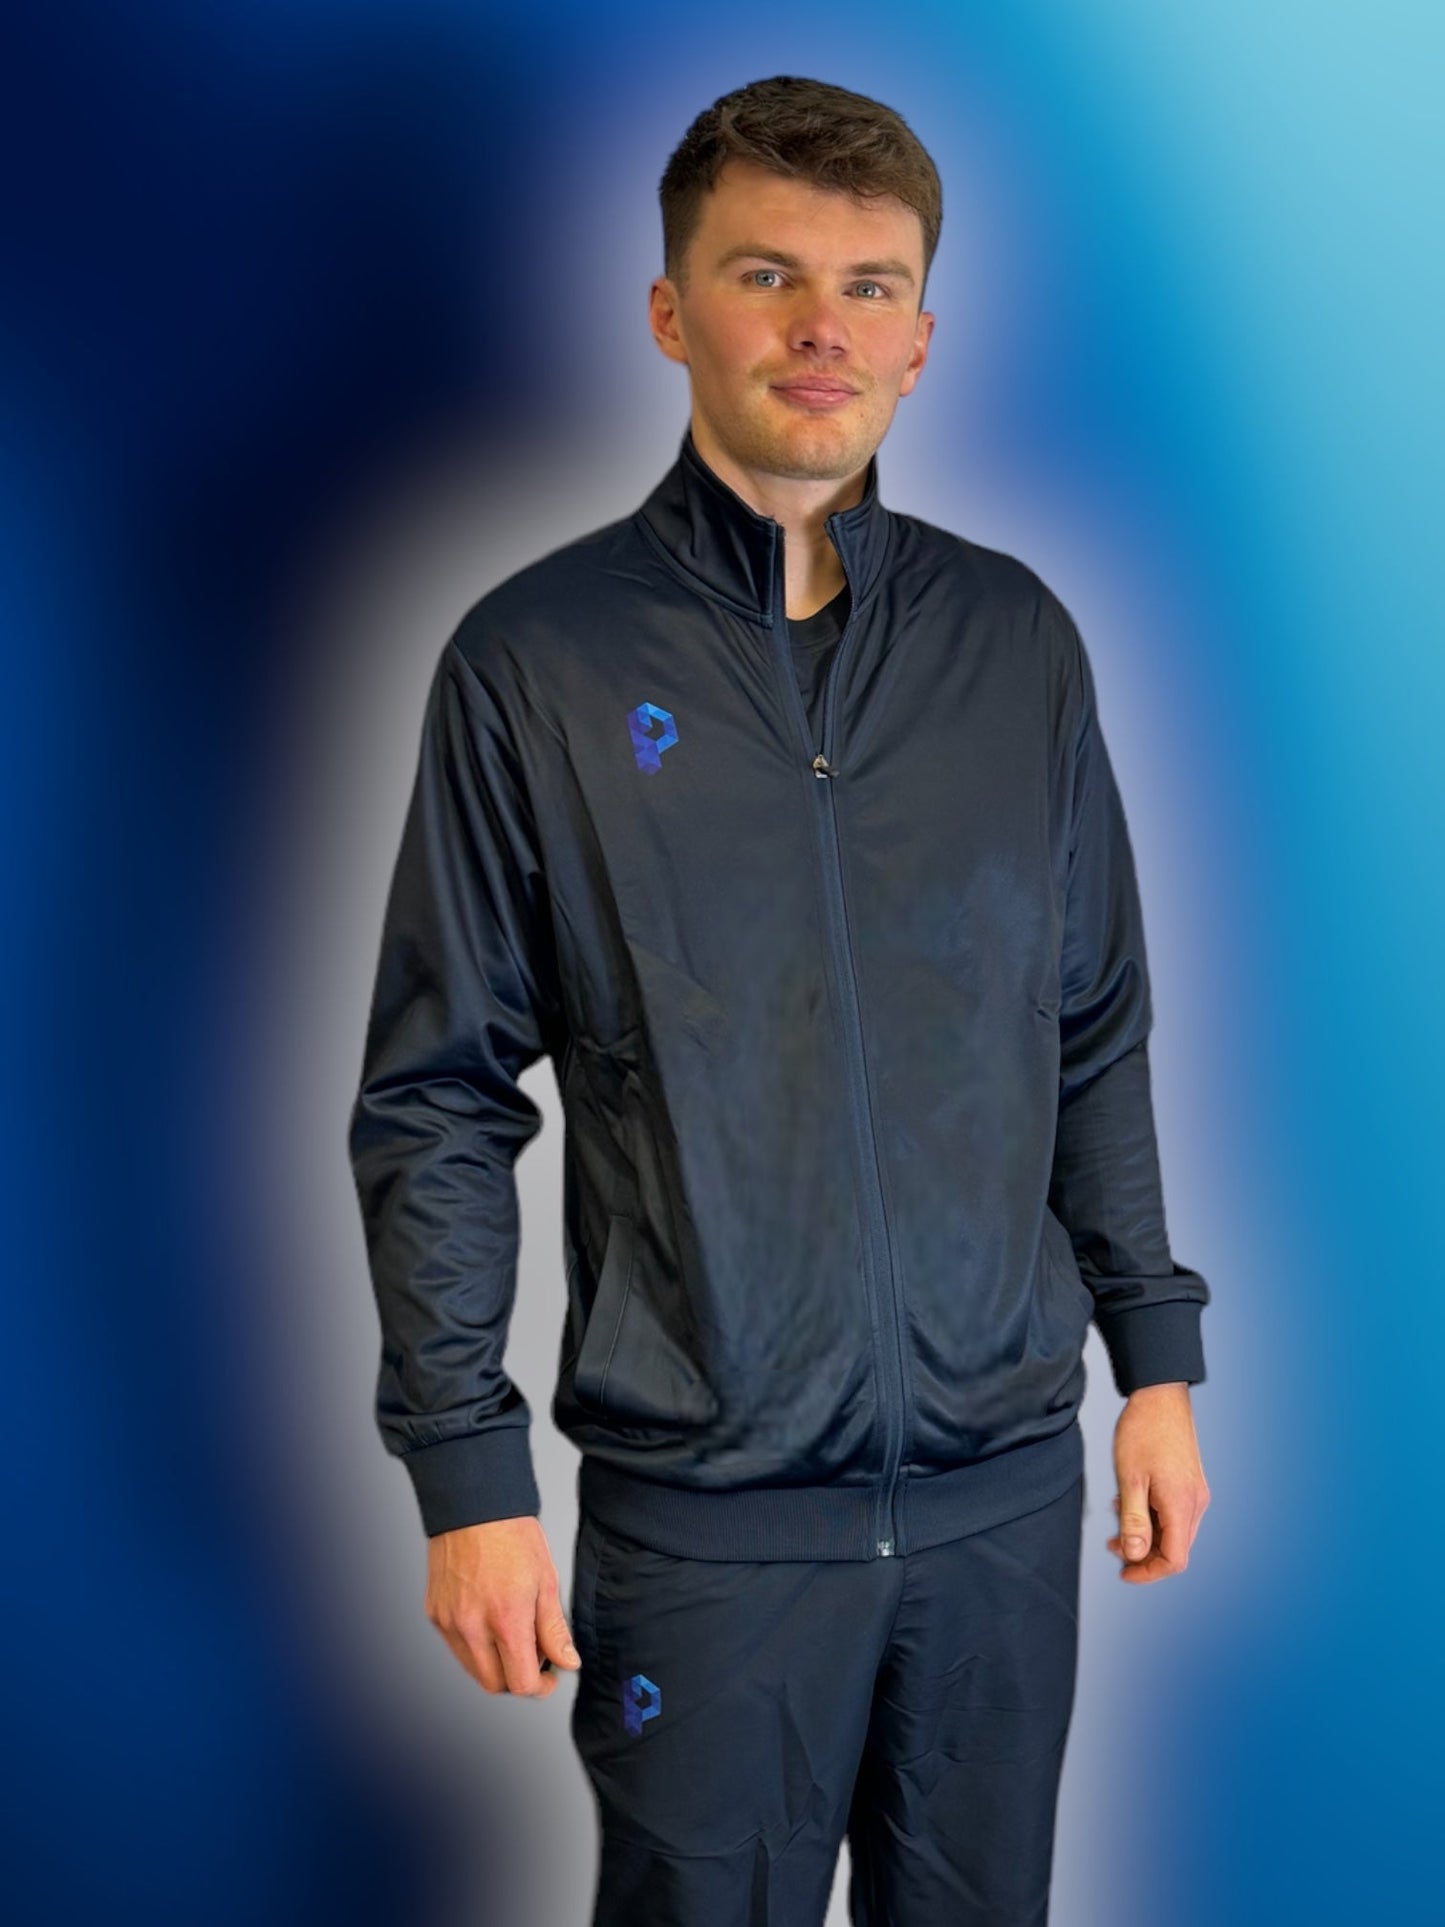 Prophecy Training Jacket - Queen Mary University Cricket Club